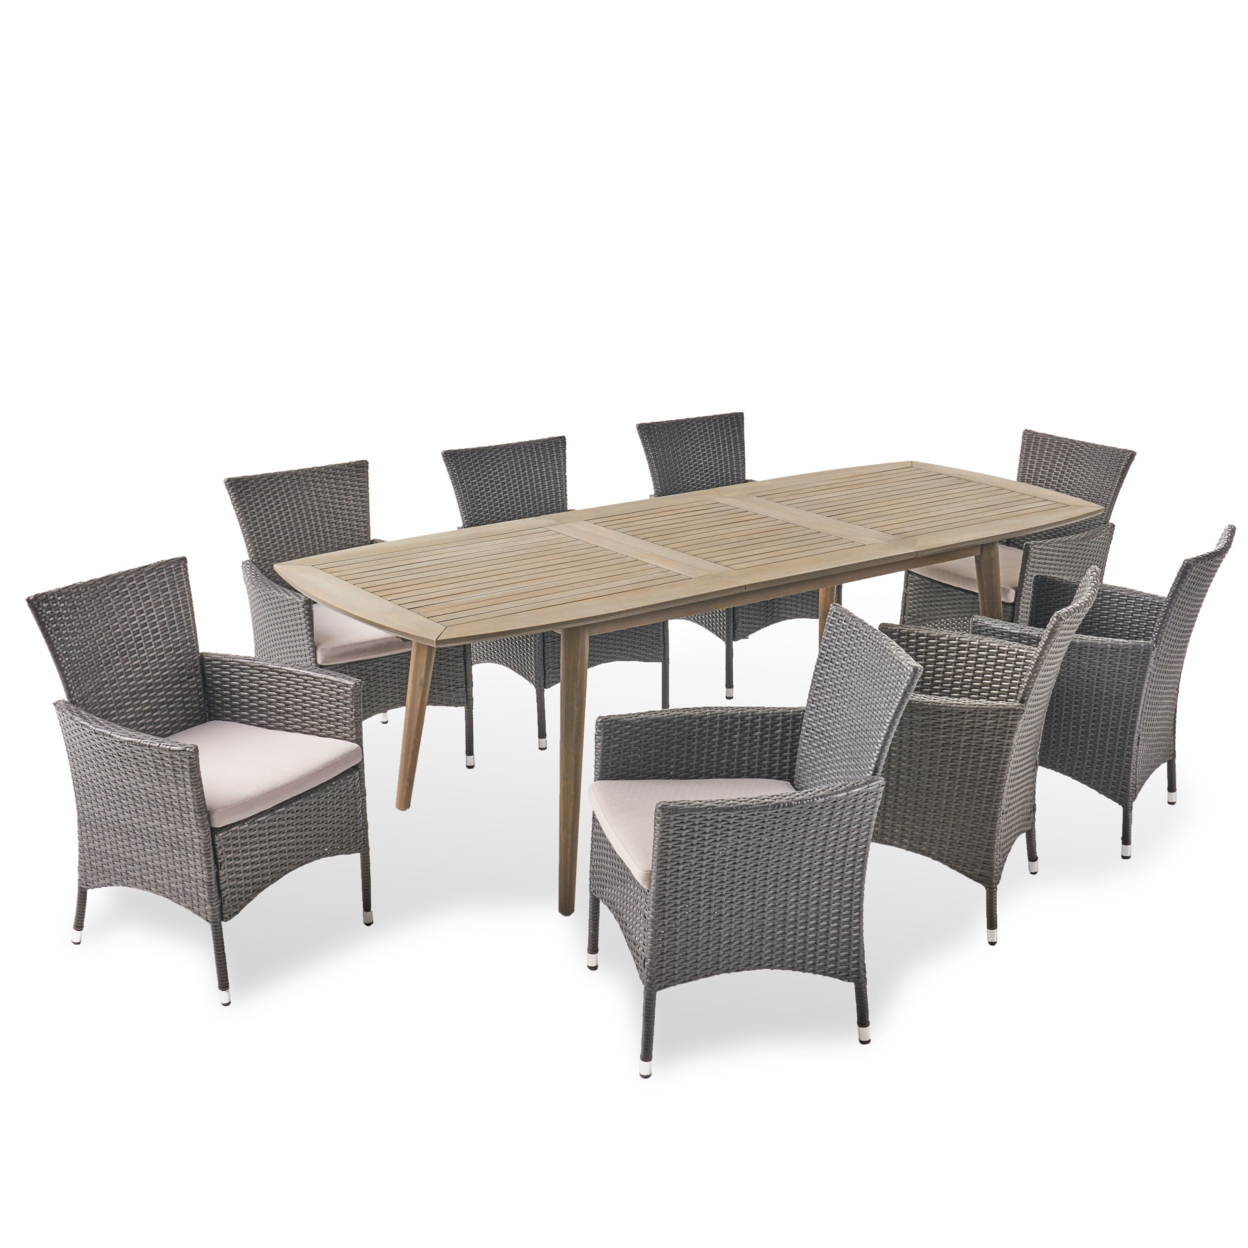 Stefan Outdoor Wood And Wicker Expandable 8 Seater Dining Set - Gray, Light Gray